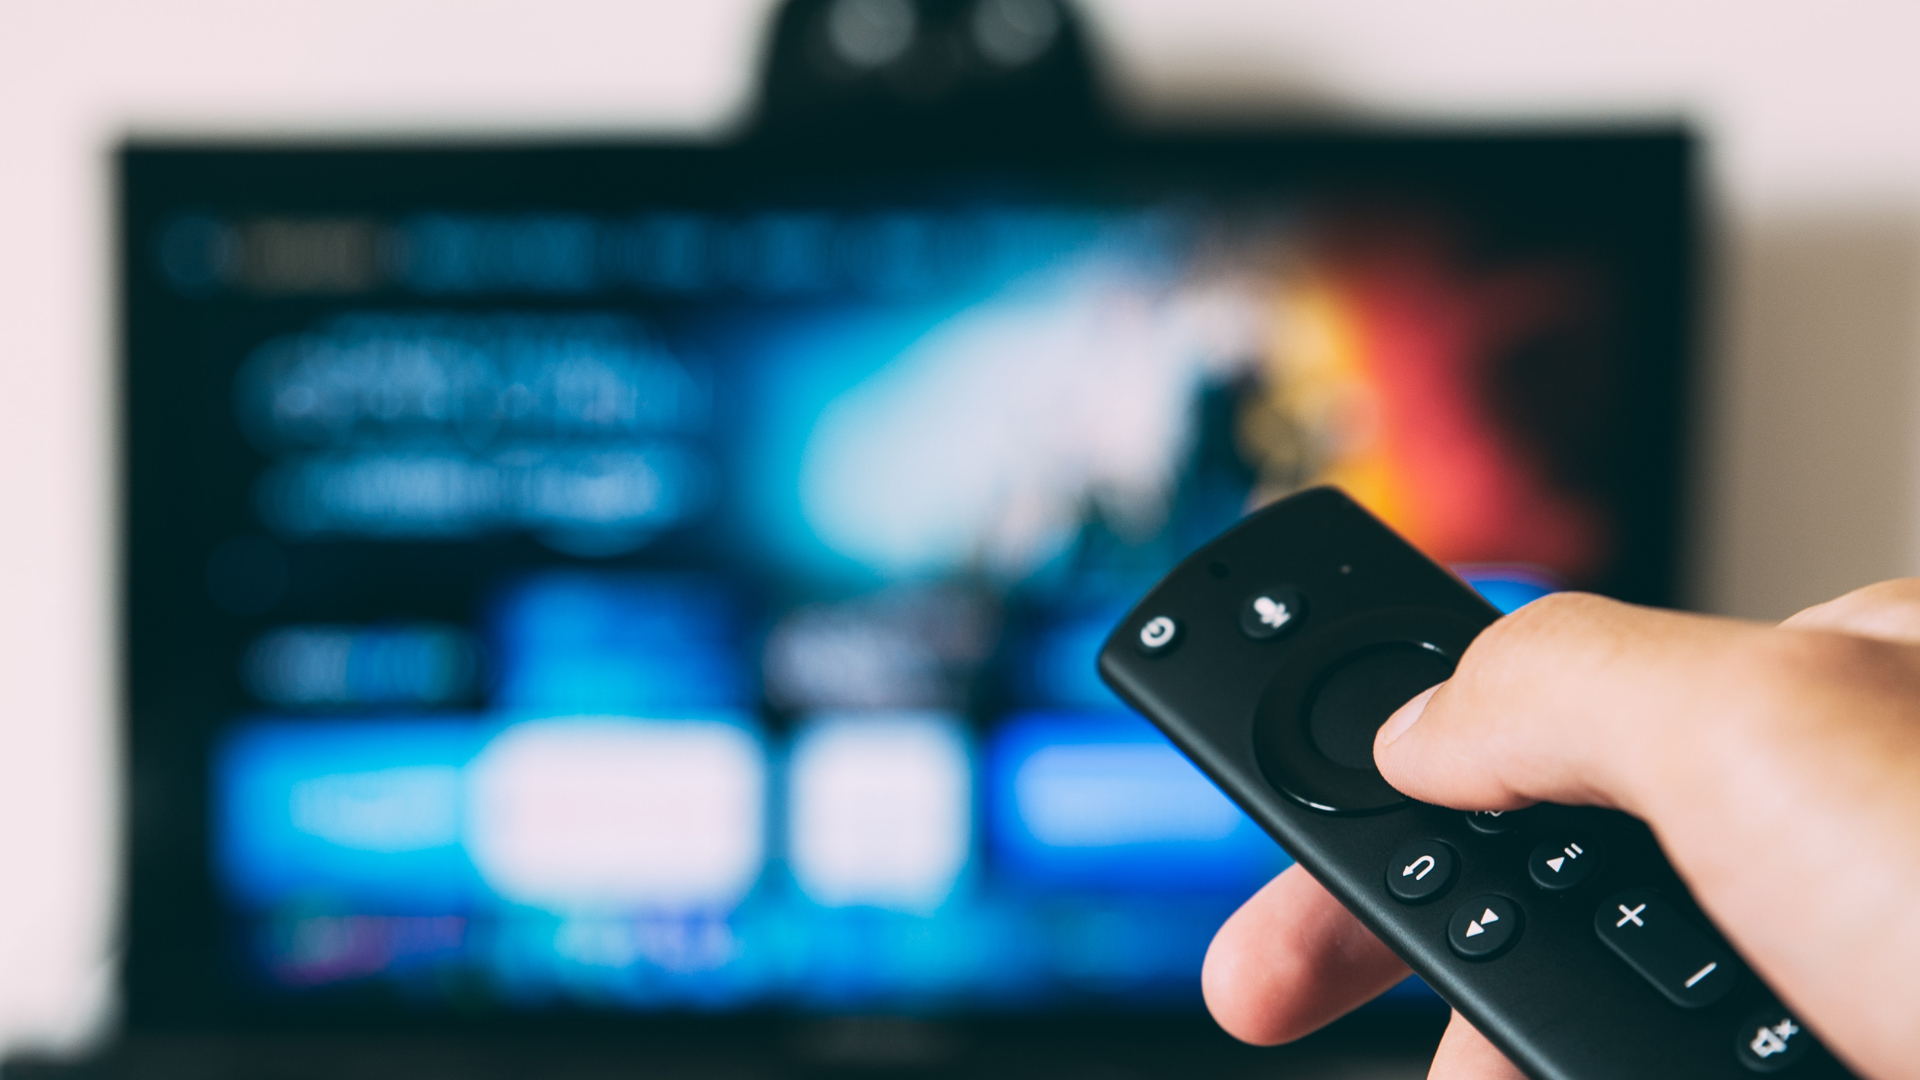 The 4 challenges of launching a successful video streaming service in OTT